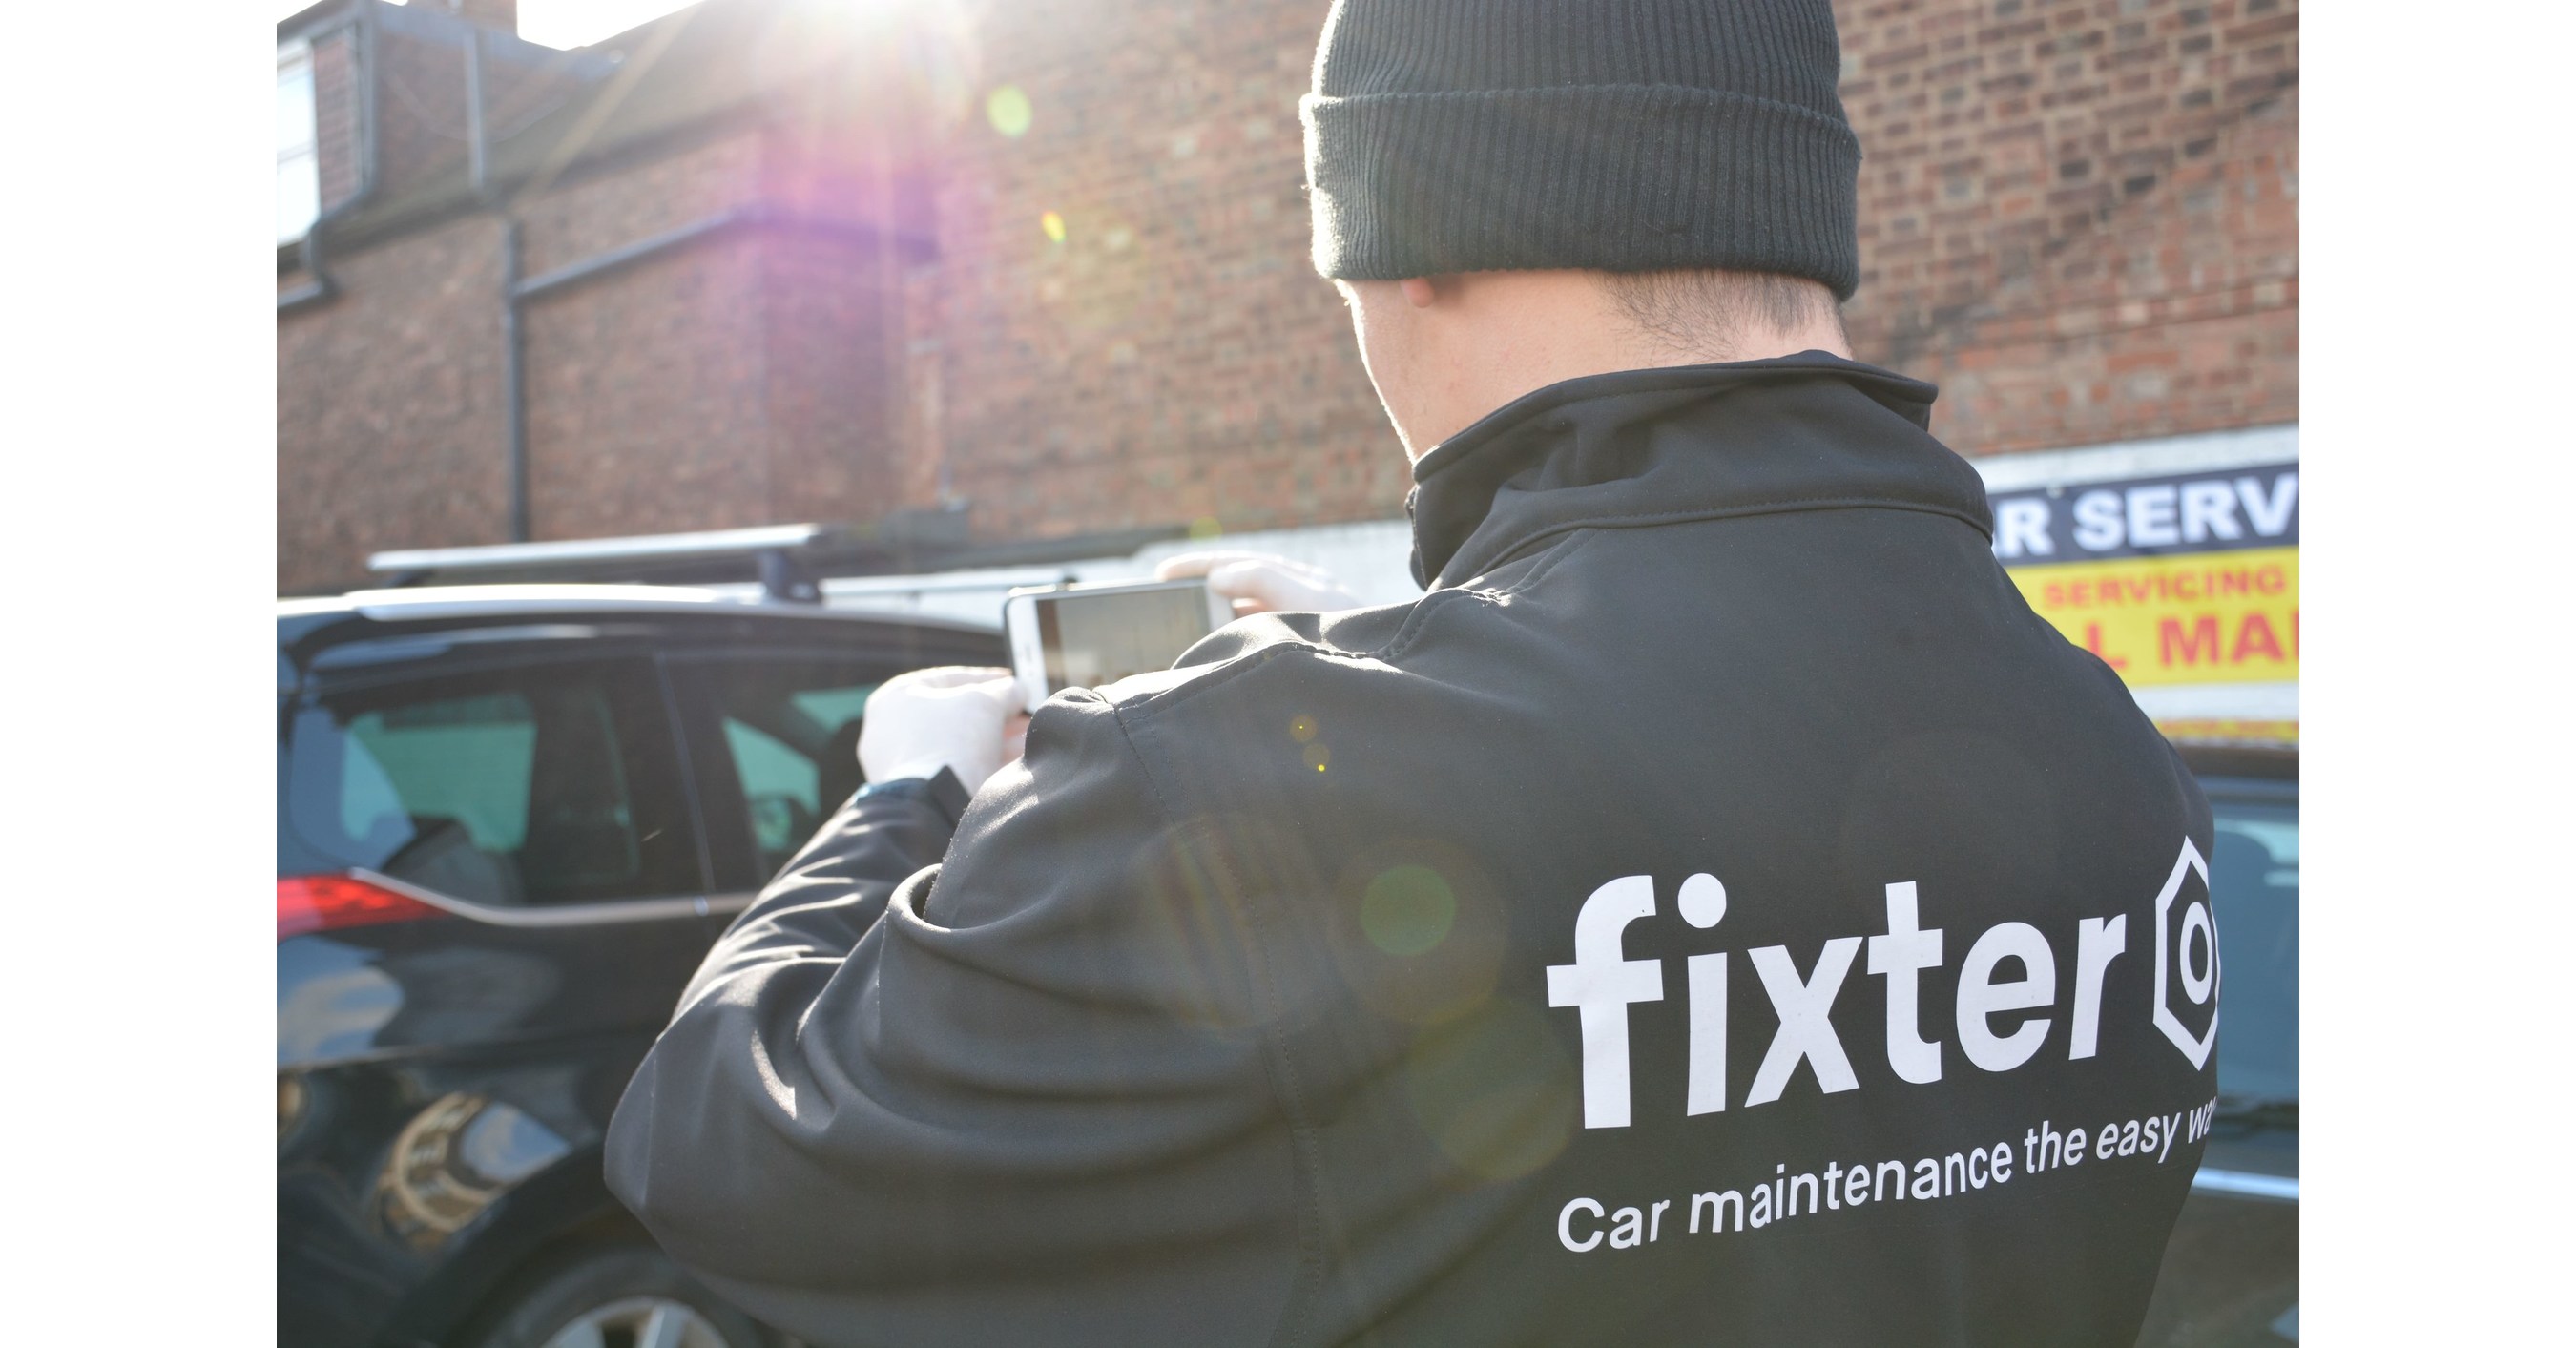 Fixter urges motorists to book-in MOT tests fast to avoid huge extension backlog and pre-Winter demand spike